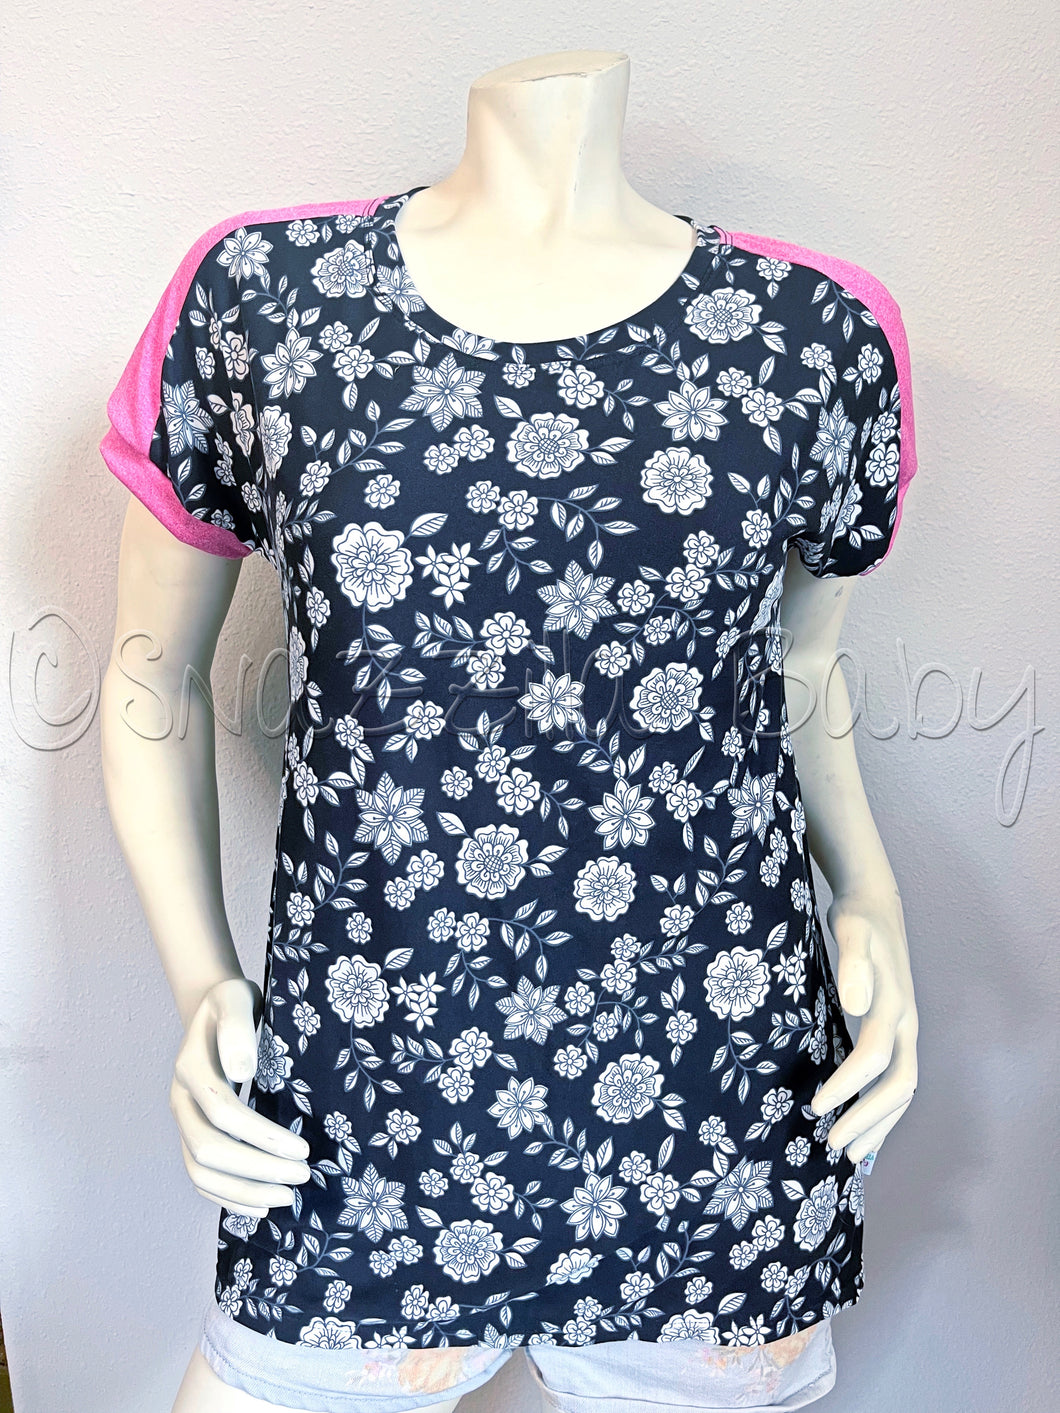 Adult XS Floral Top